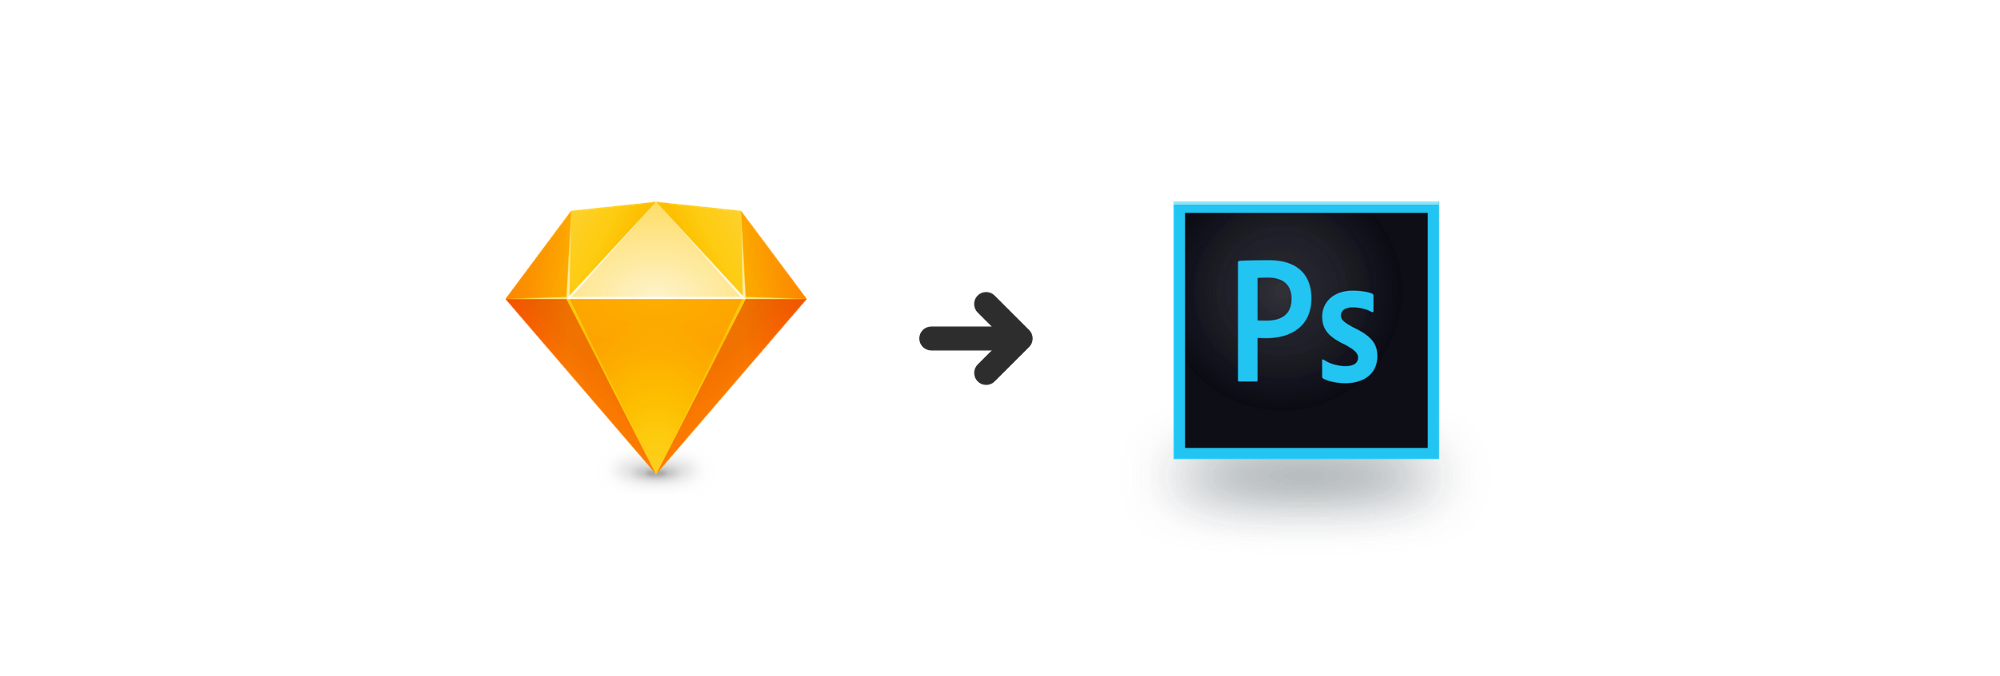 How properly export your. Convert png to vector photoshop